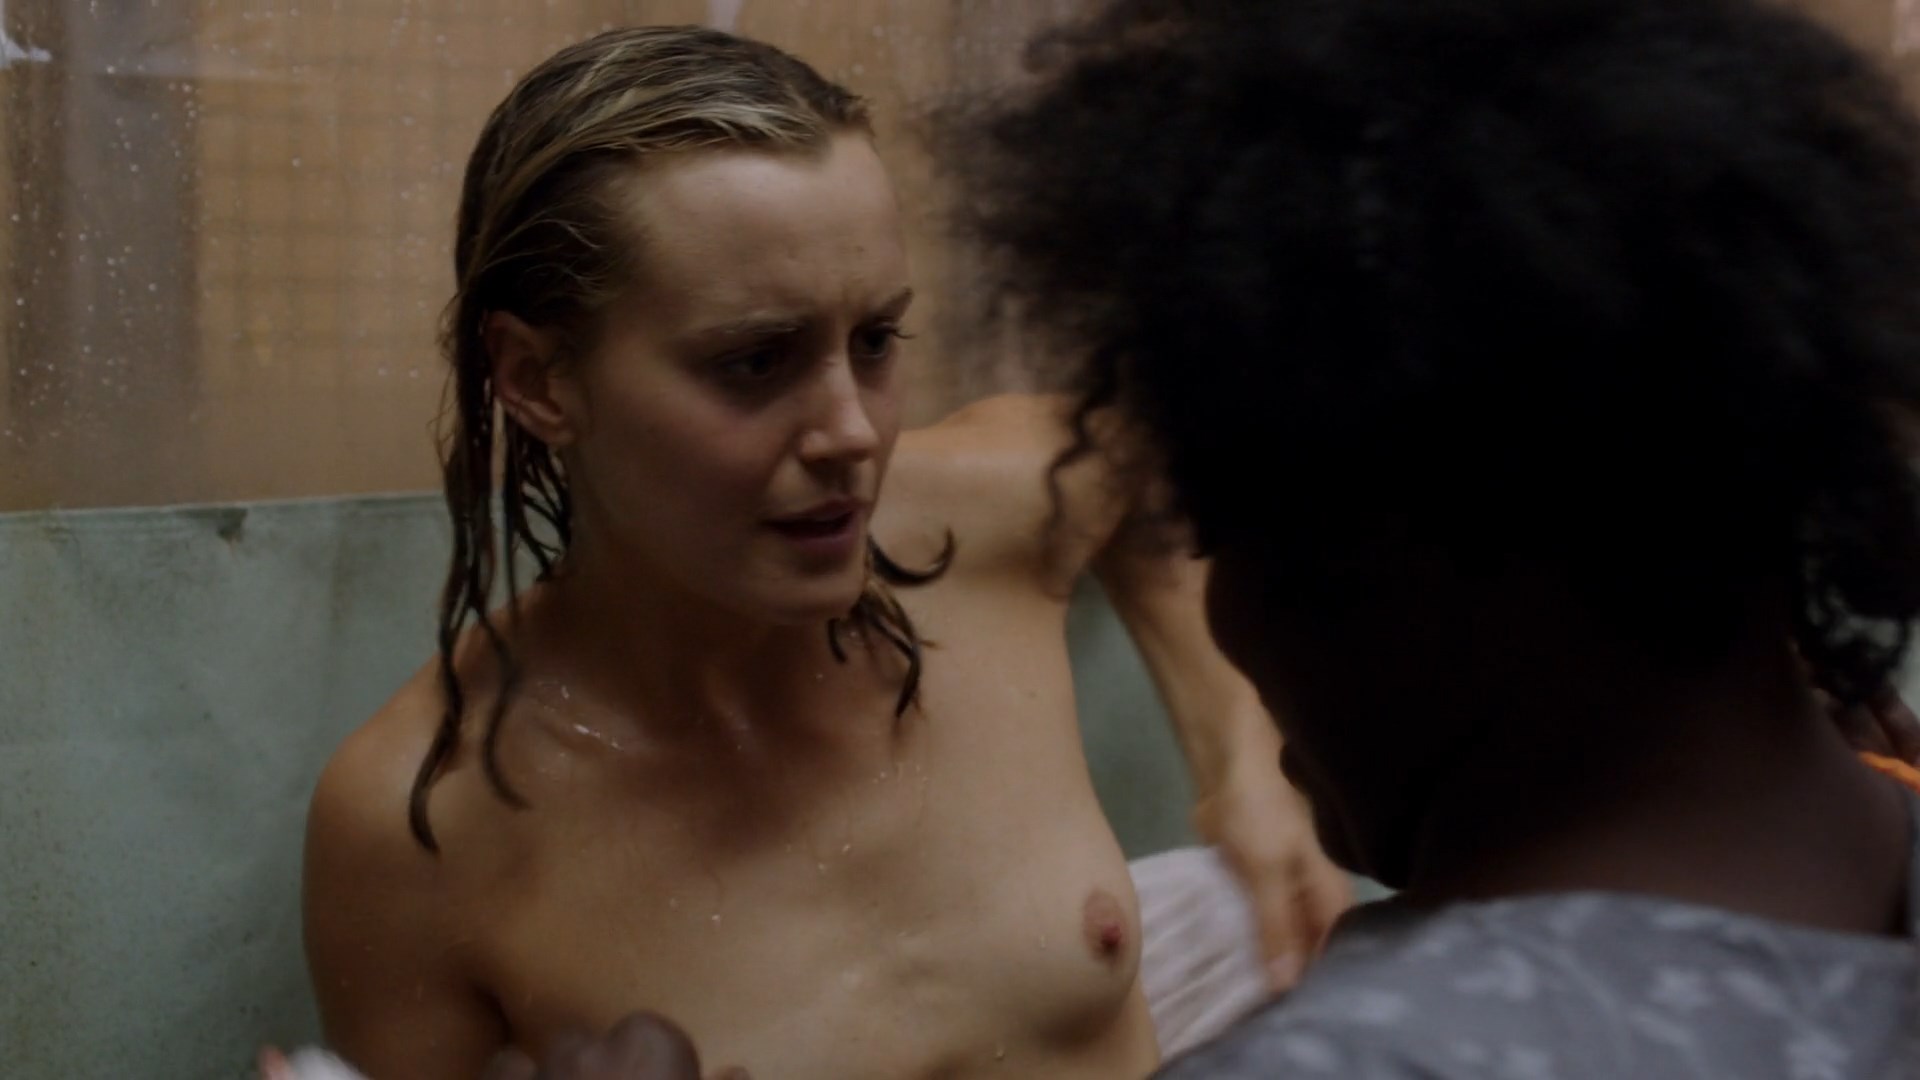 Ladies from Orange Is The New Black S1-7 - 1080p (32 Clips/Names Inside) .